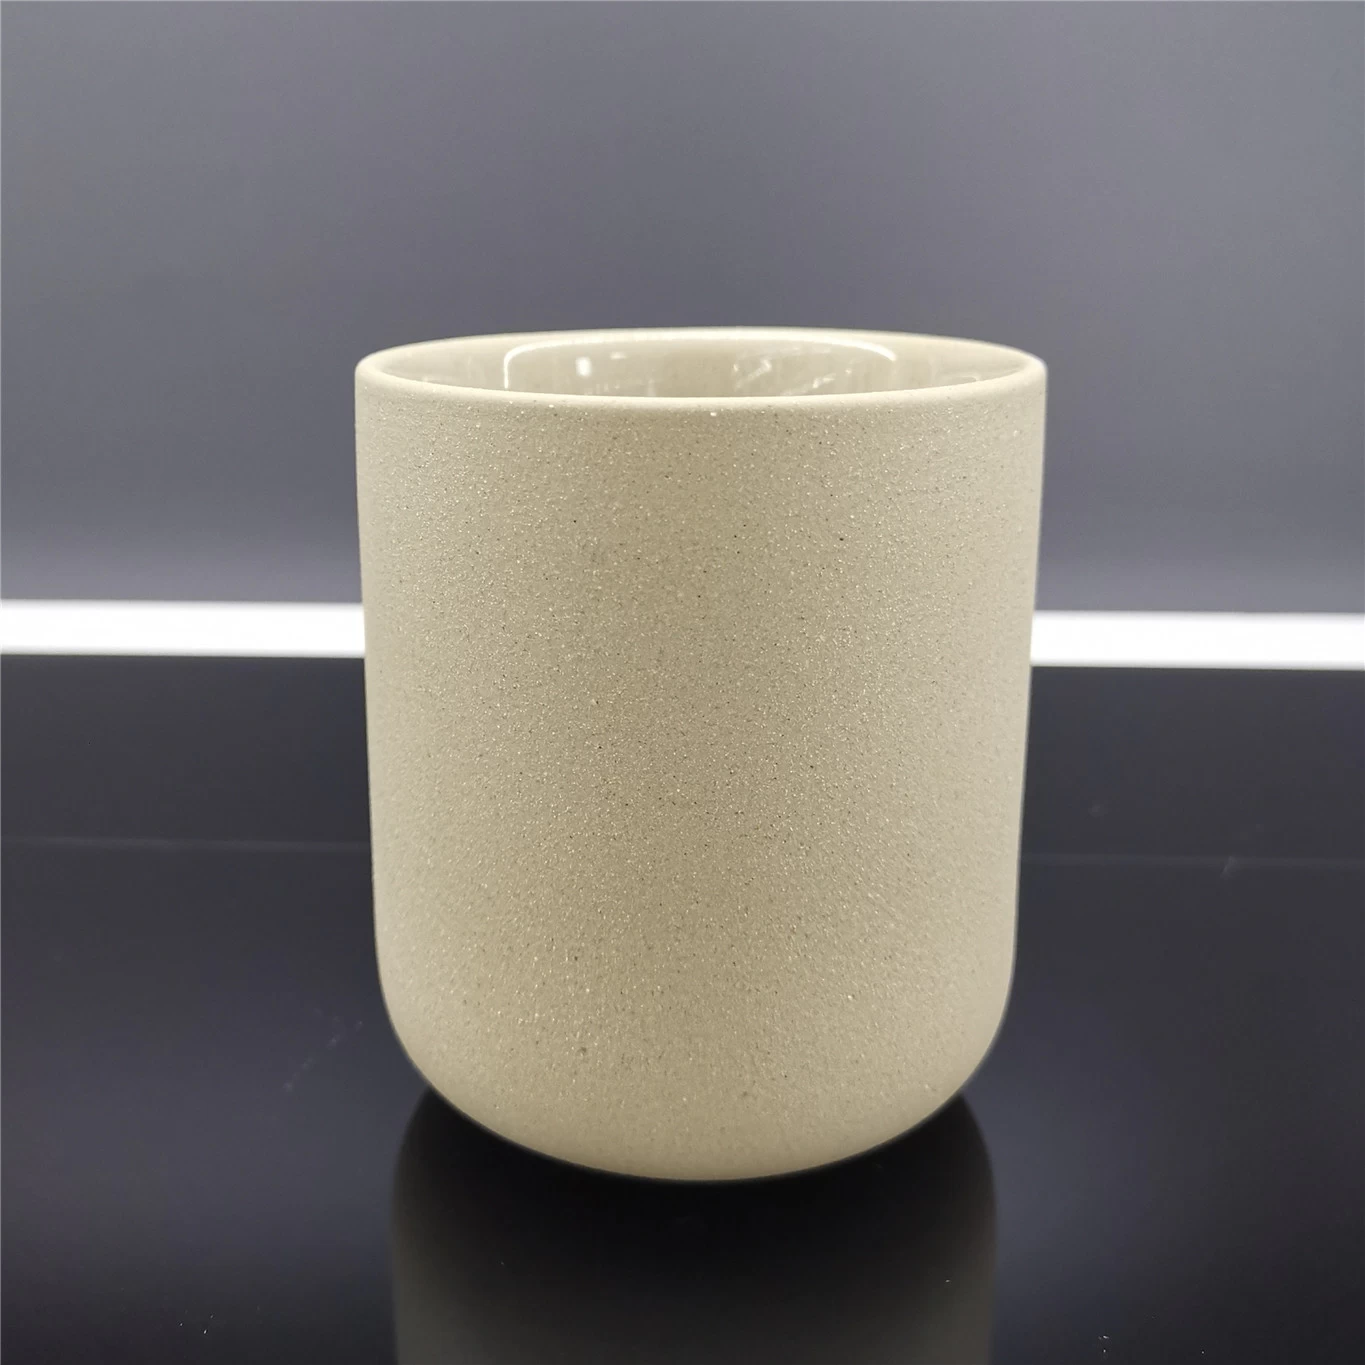 10oz round shape sand soil candle holders for home decorations